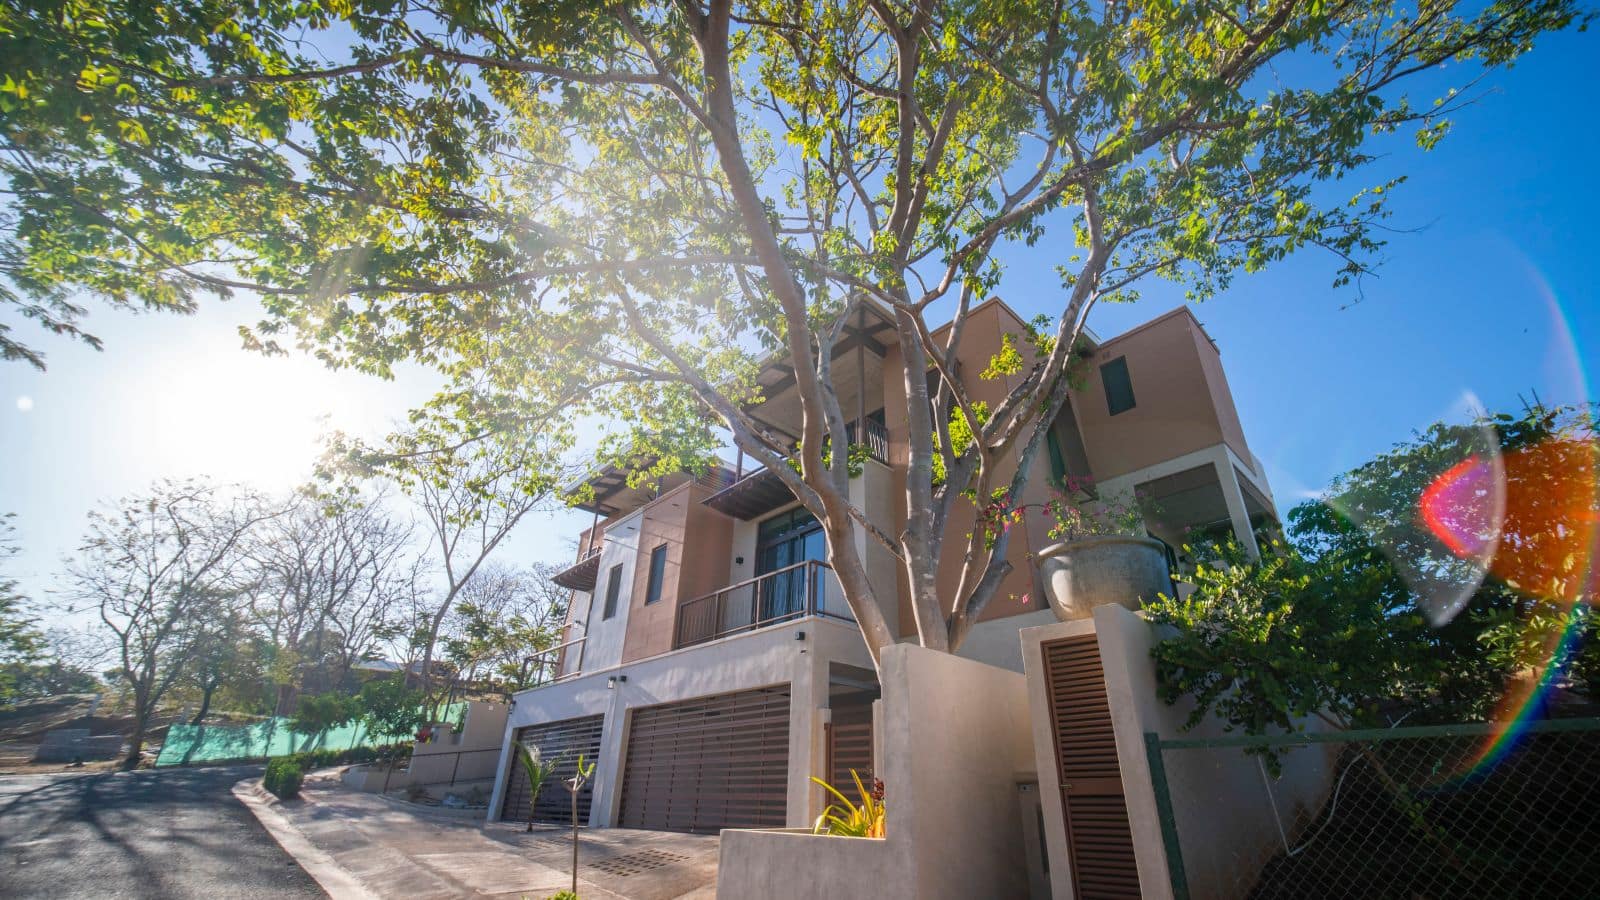 Casa Bromelia, a stunning home within Tamarindo Park, offers ocean views and embodies an eco-friendly lifestyle, making it a prime real estate investment in Costa Rica.